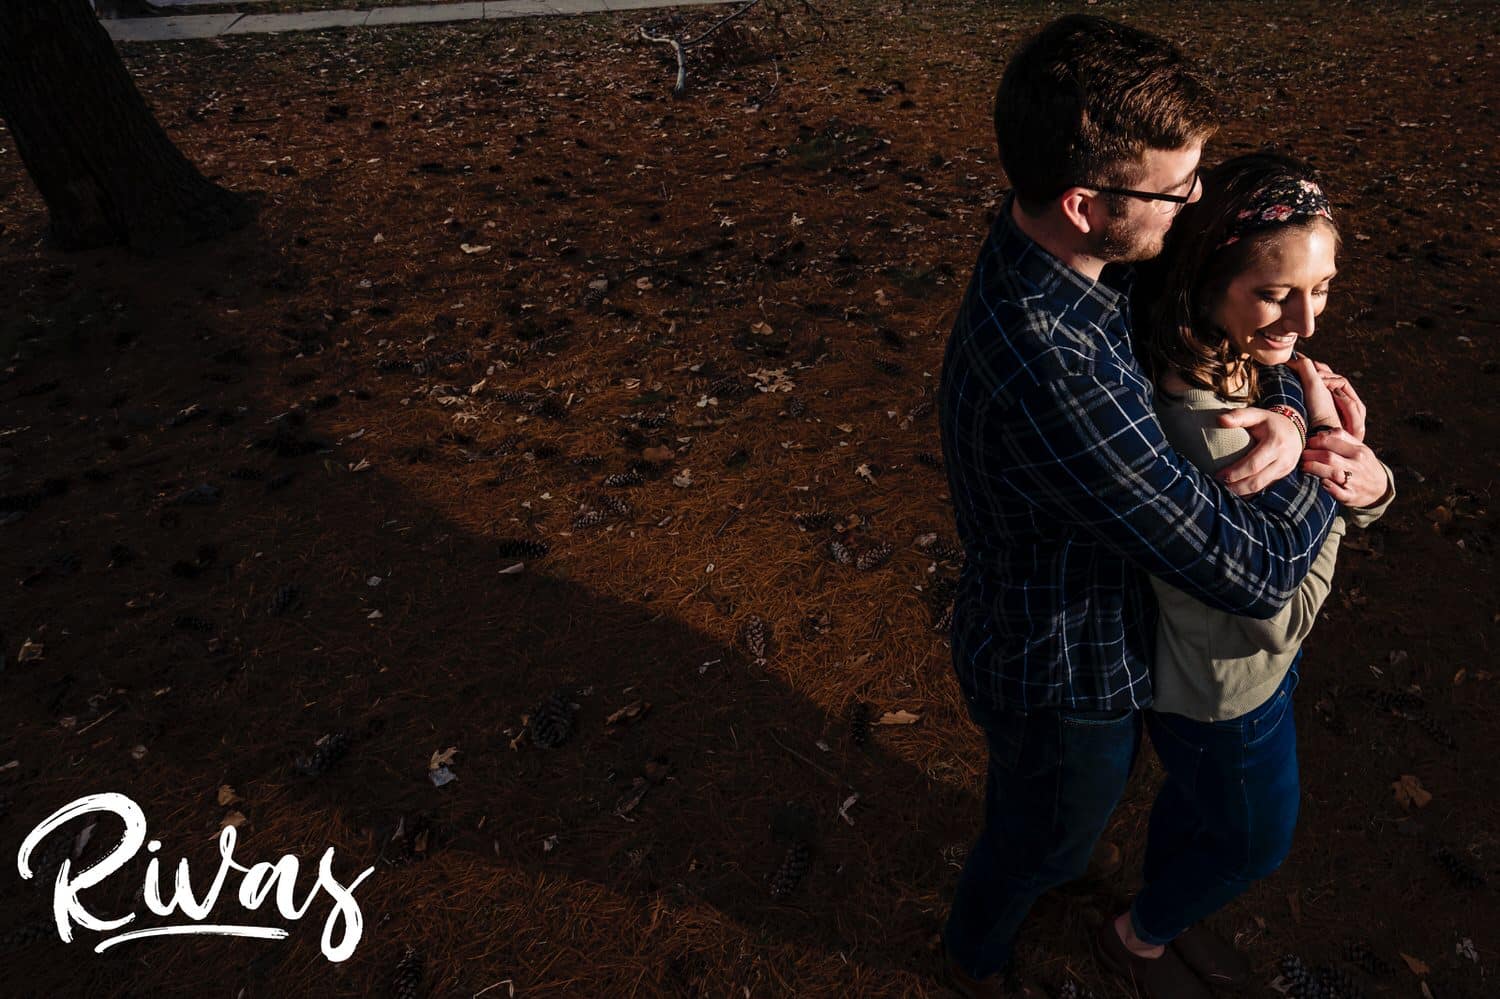 A bold portrait of an engaged couple standing in a field of fallen pine needles during their winter engagement session. 